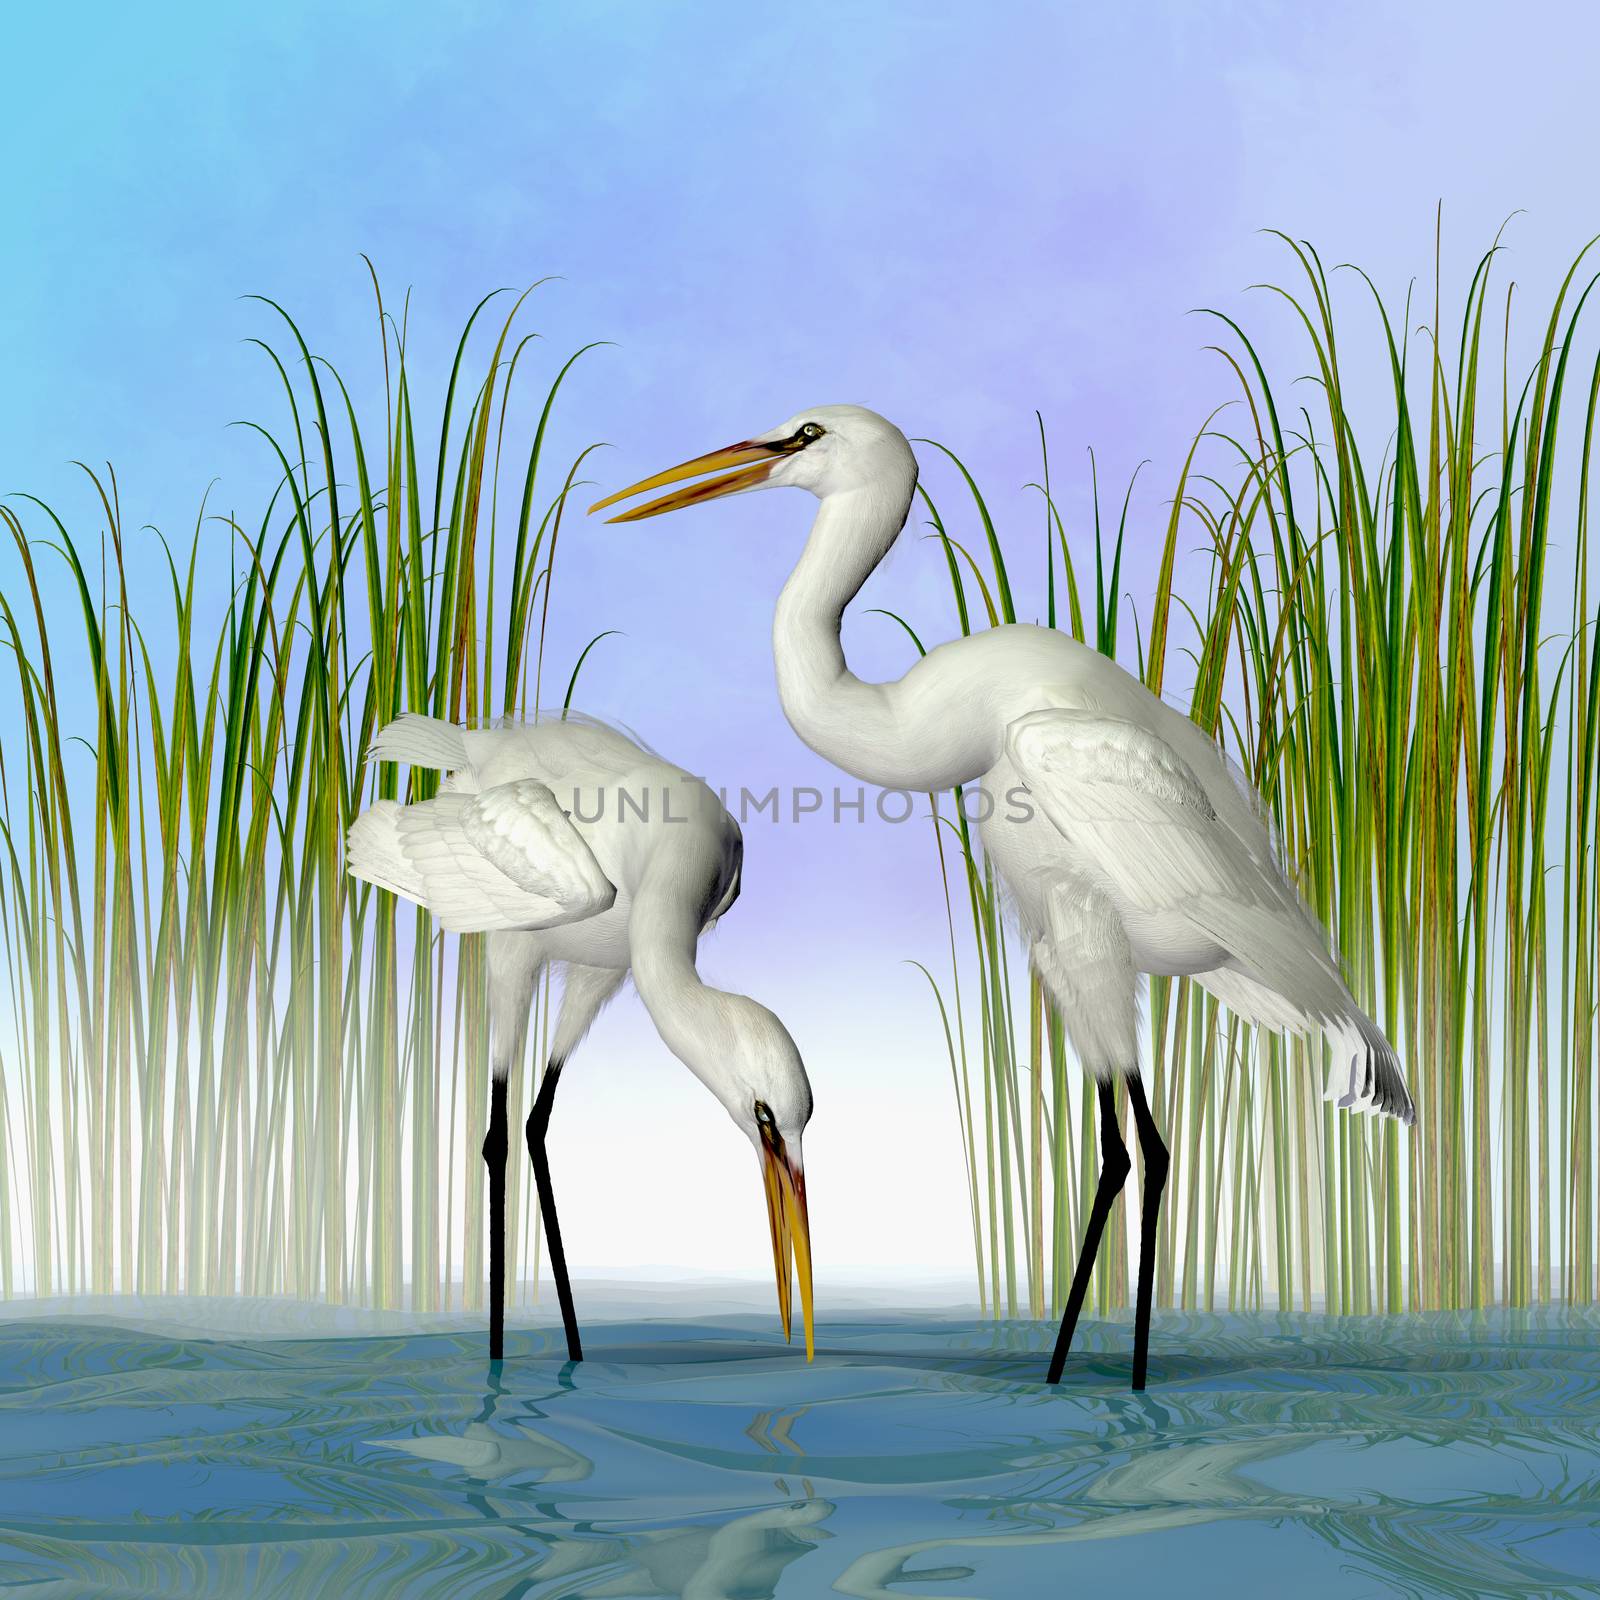 The Great Egret is a tall standing avian waterbird that lives in Asia, the Americas and Europe.